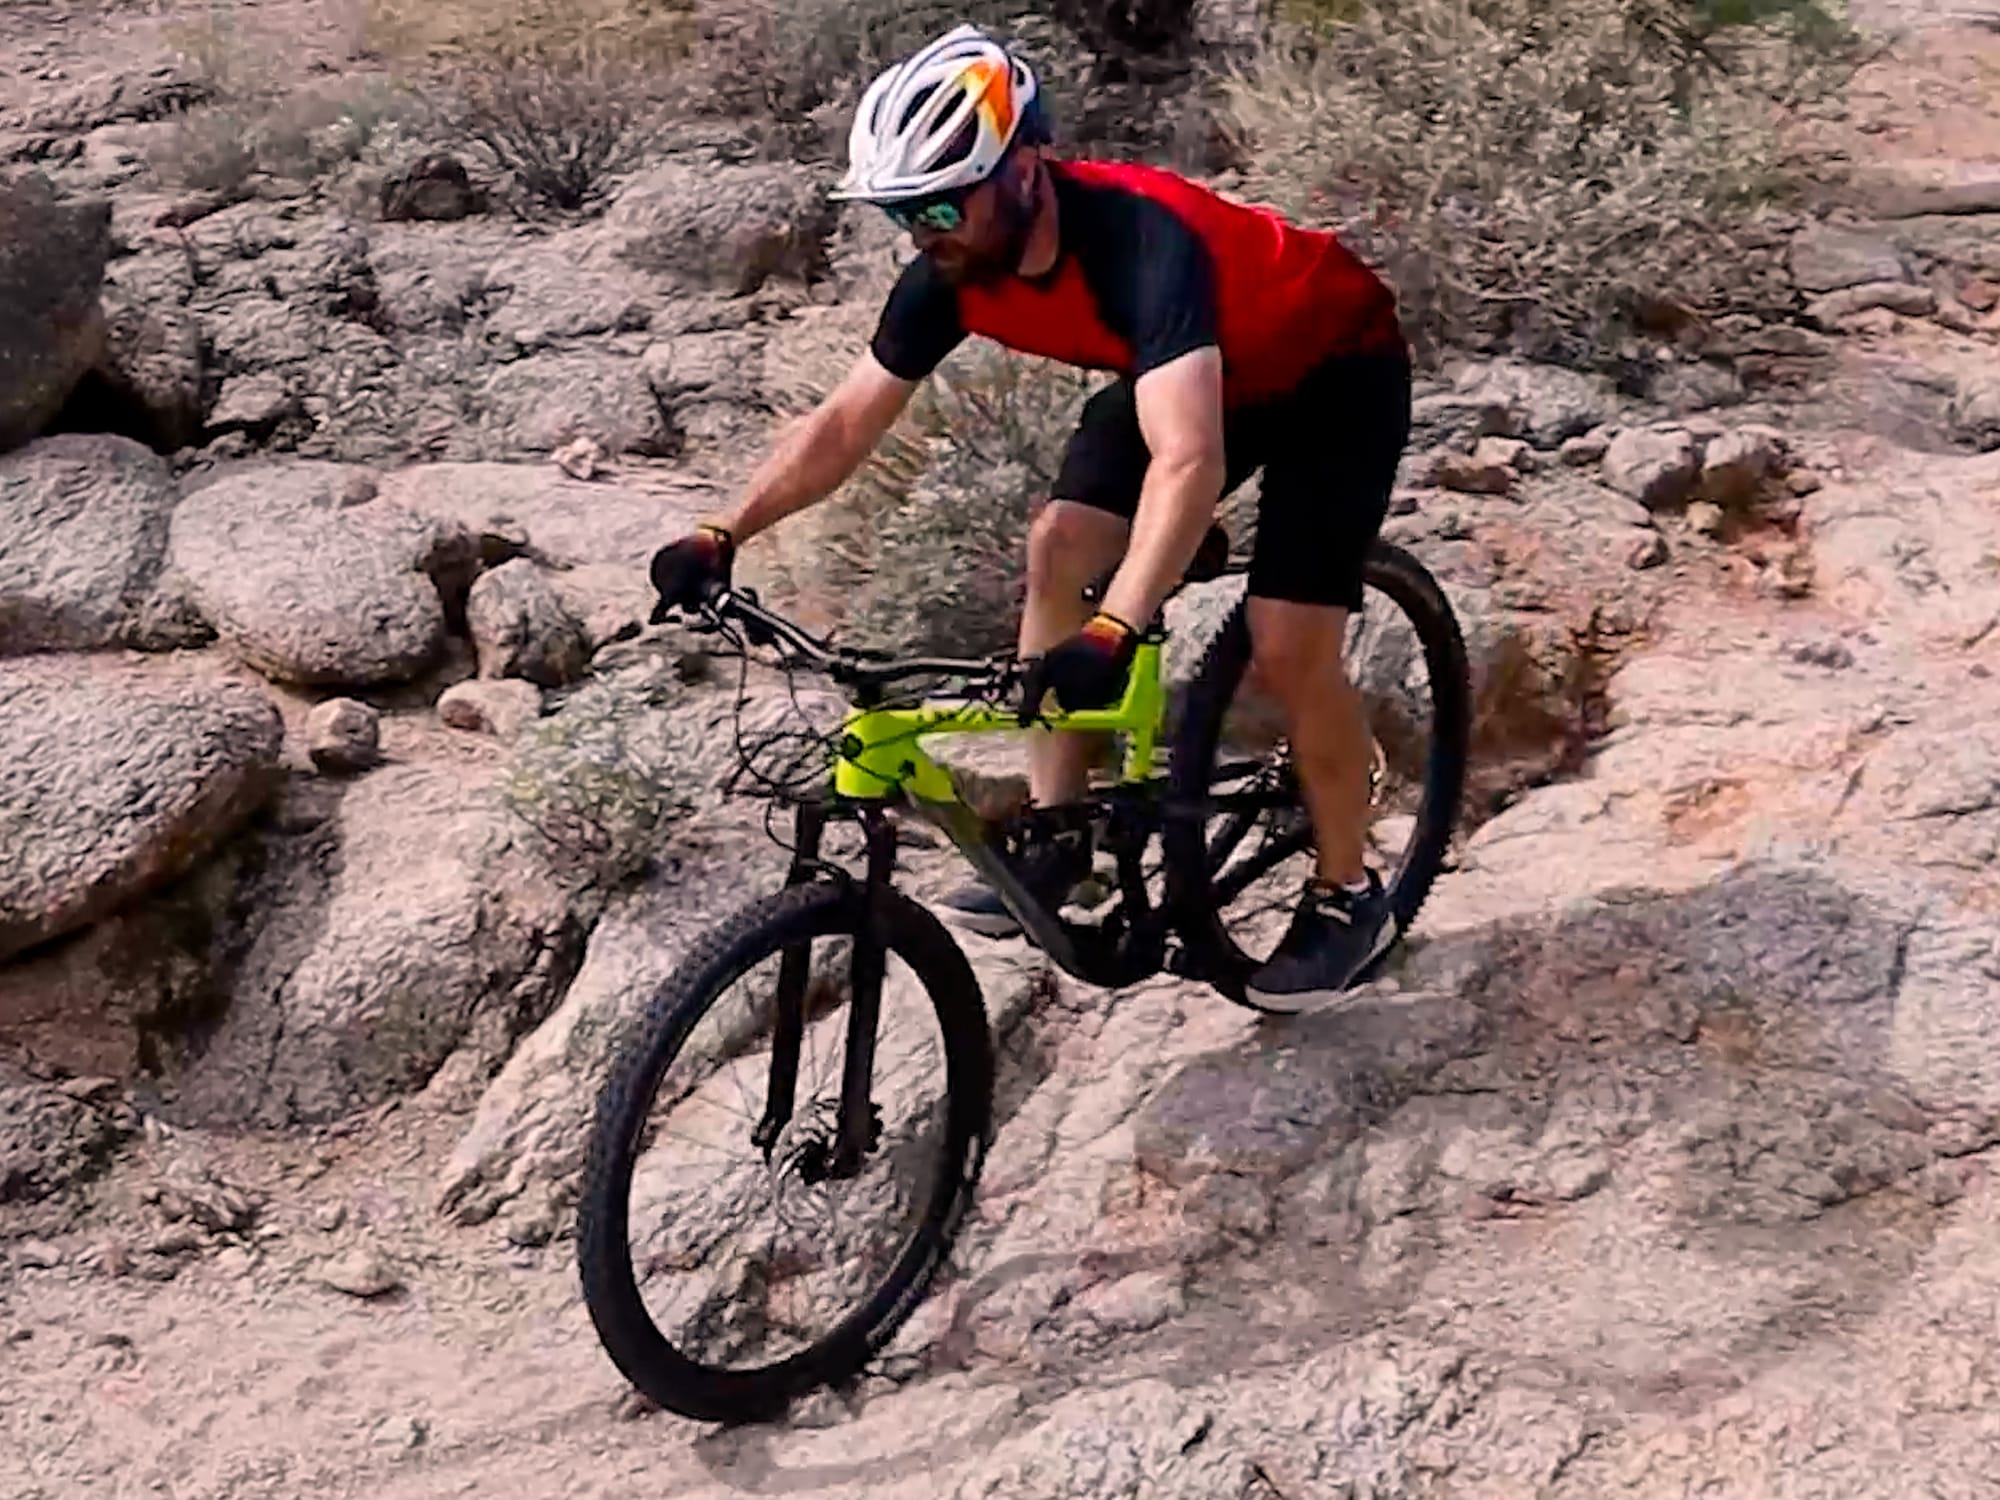 Is This The Best Budget Short-Travel Mountain Bike?